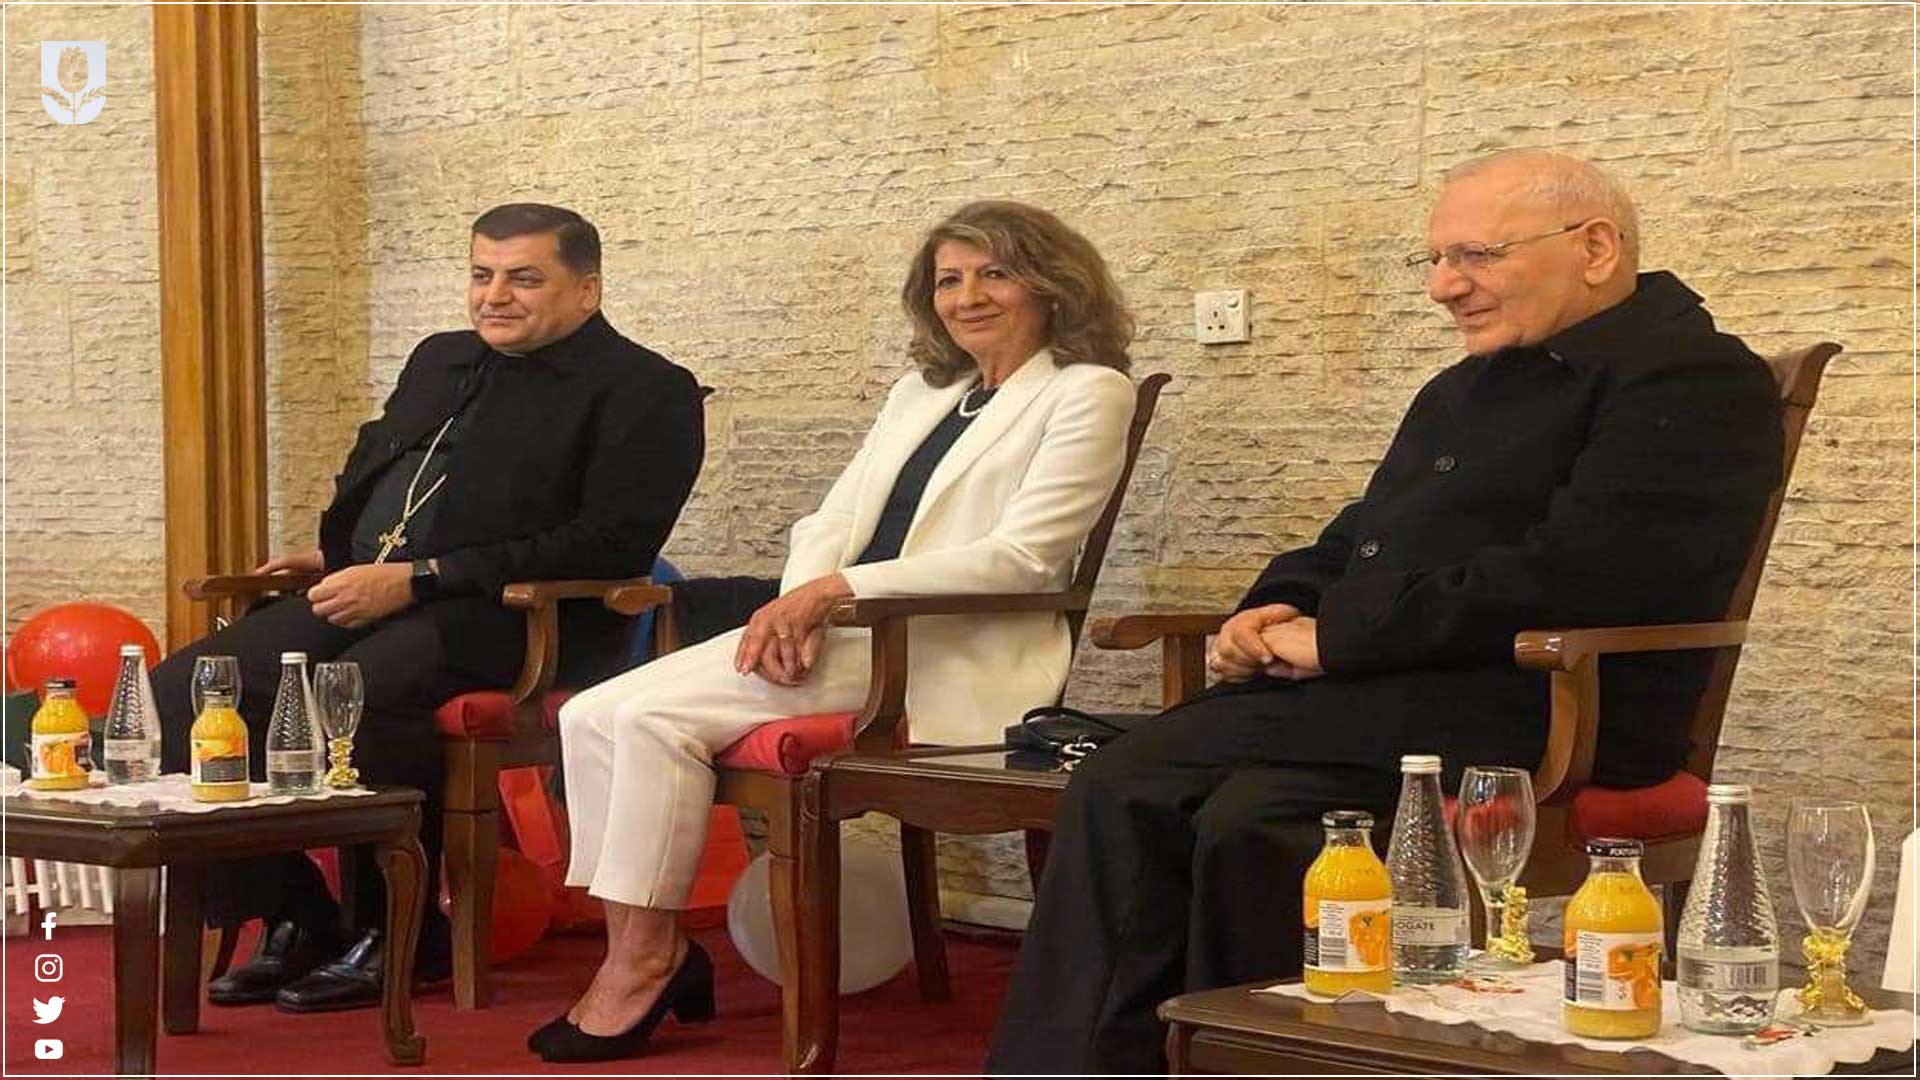  Iraqi First Lady sitting in the middle